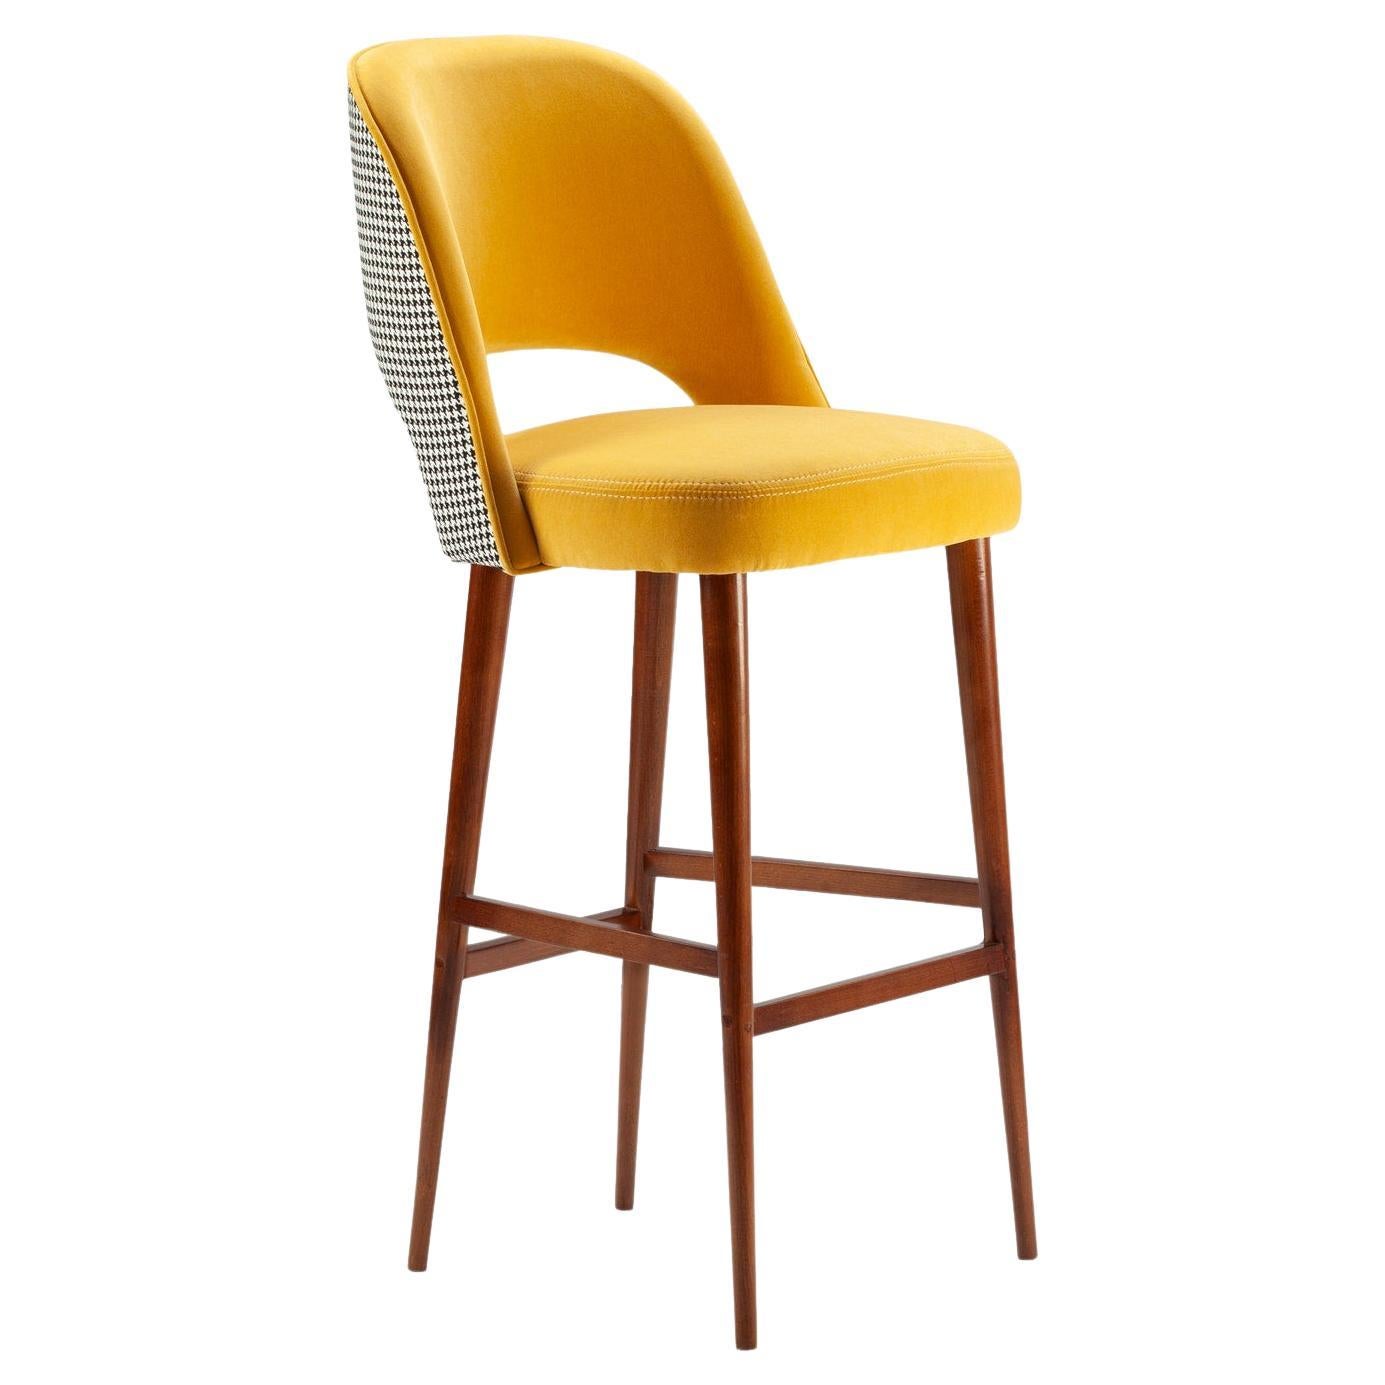 Comfortable and elegant, Ava bar stool is a versatile piece where creativity meets no boundaries: fabrics, solid wood, lacquered wood and brass fittings are chosen and combined to produce the perfect combination to each space and concept. Made to